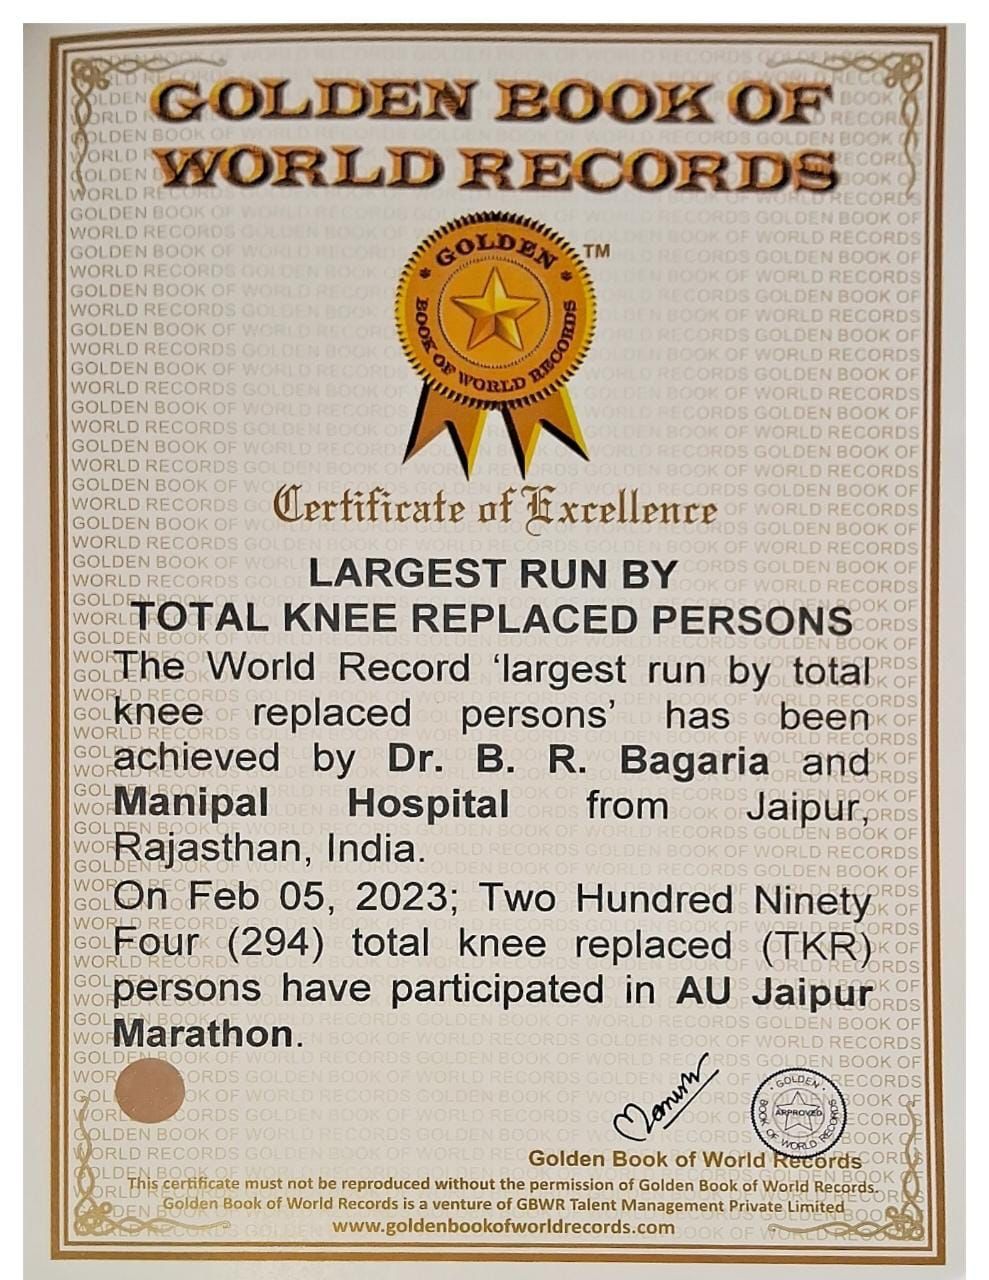 Golden book of record in joint replacement